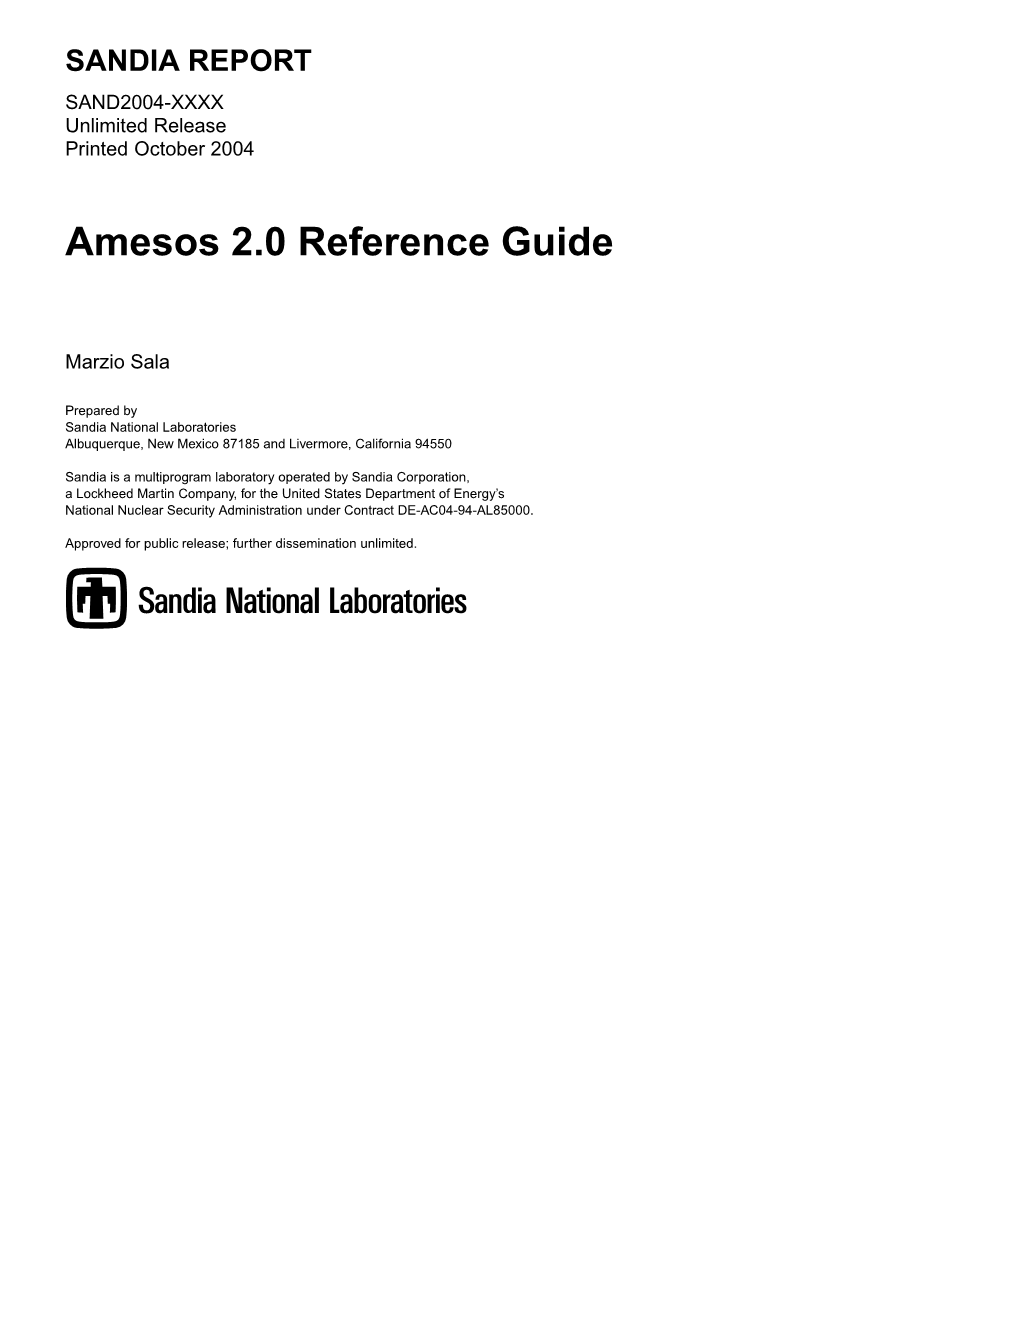 Amesos 2.0 Reference Guide